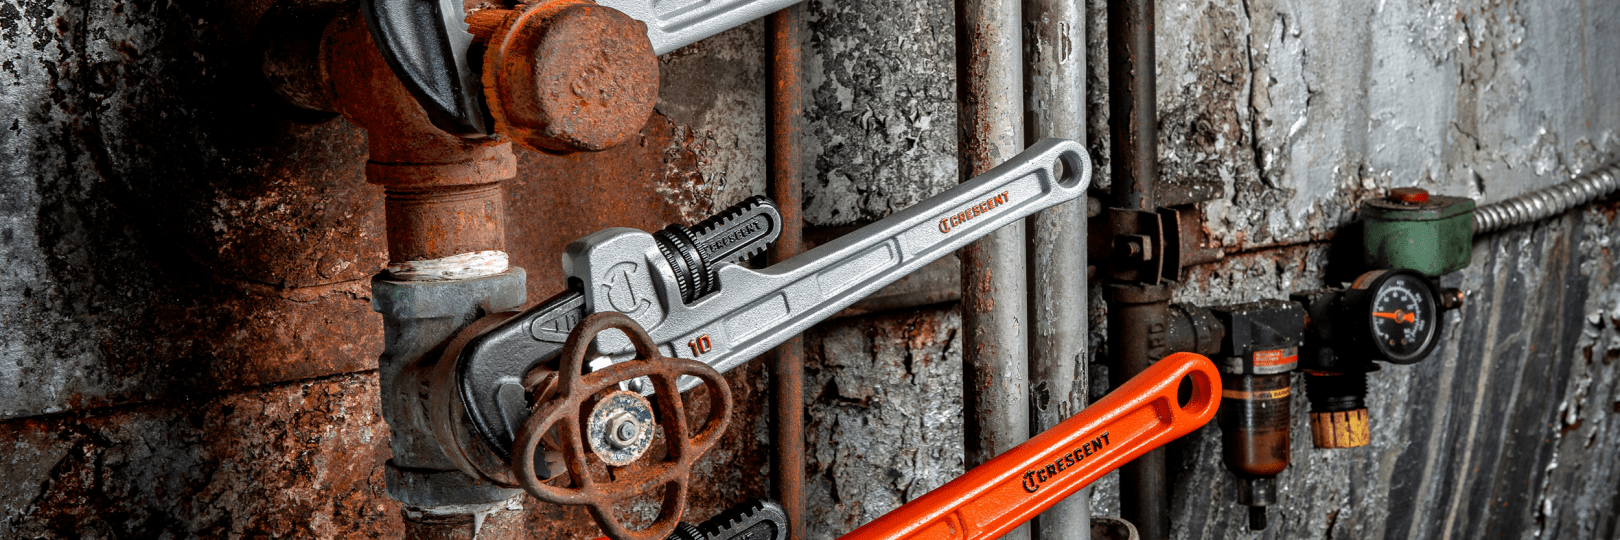 Pipe Wrench family